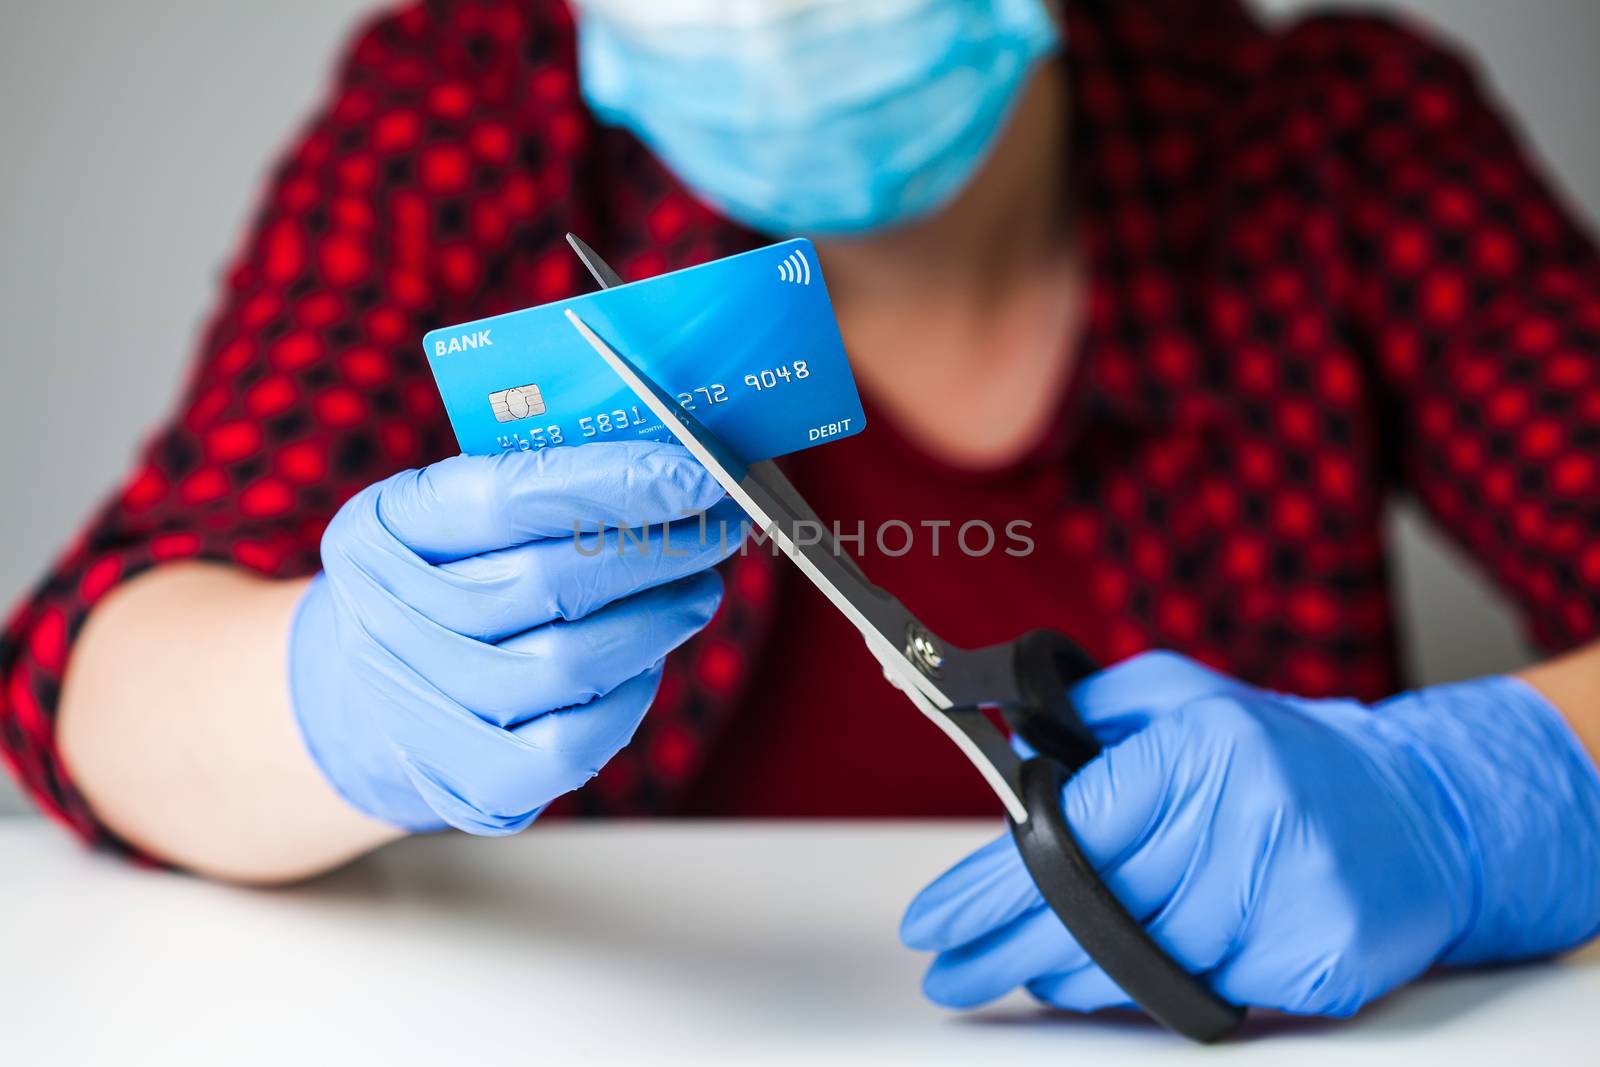 Caucasian female person cutting bank card with scissors by Plyushkin